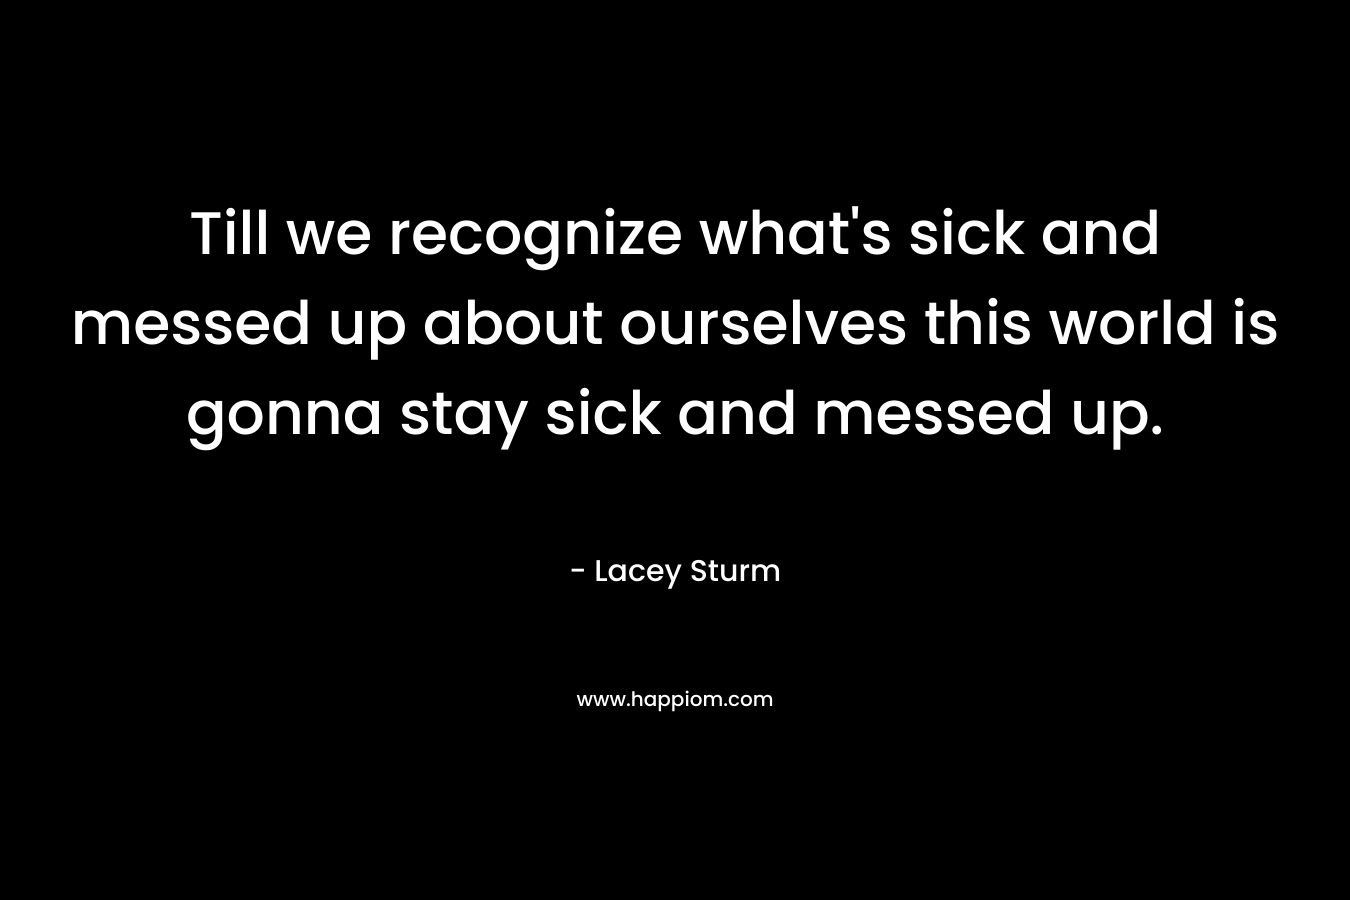 Till we recognize what’s sick and messed up about ourselves this world is gonna stay sick and messed up. – Lacey Sturm